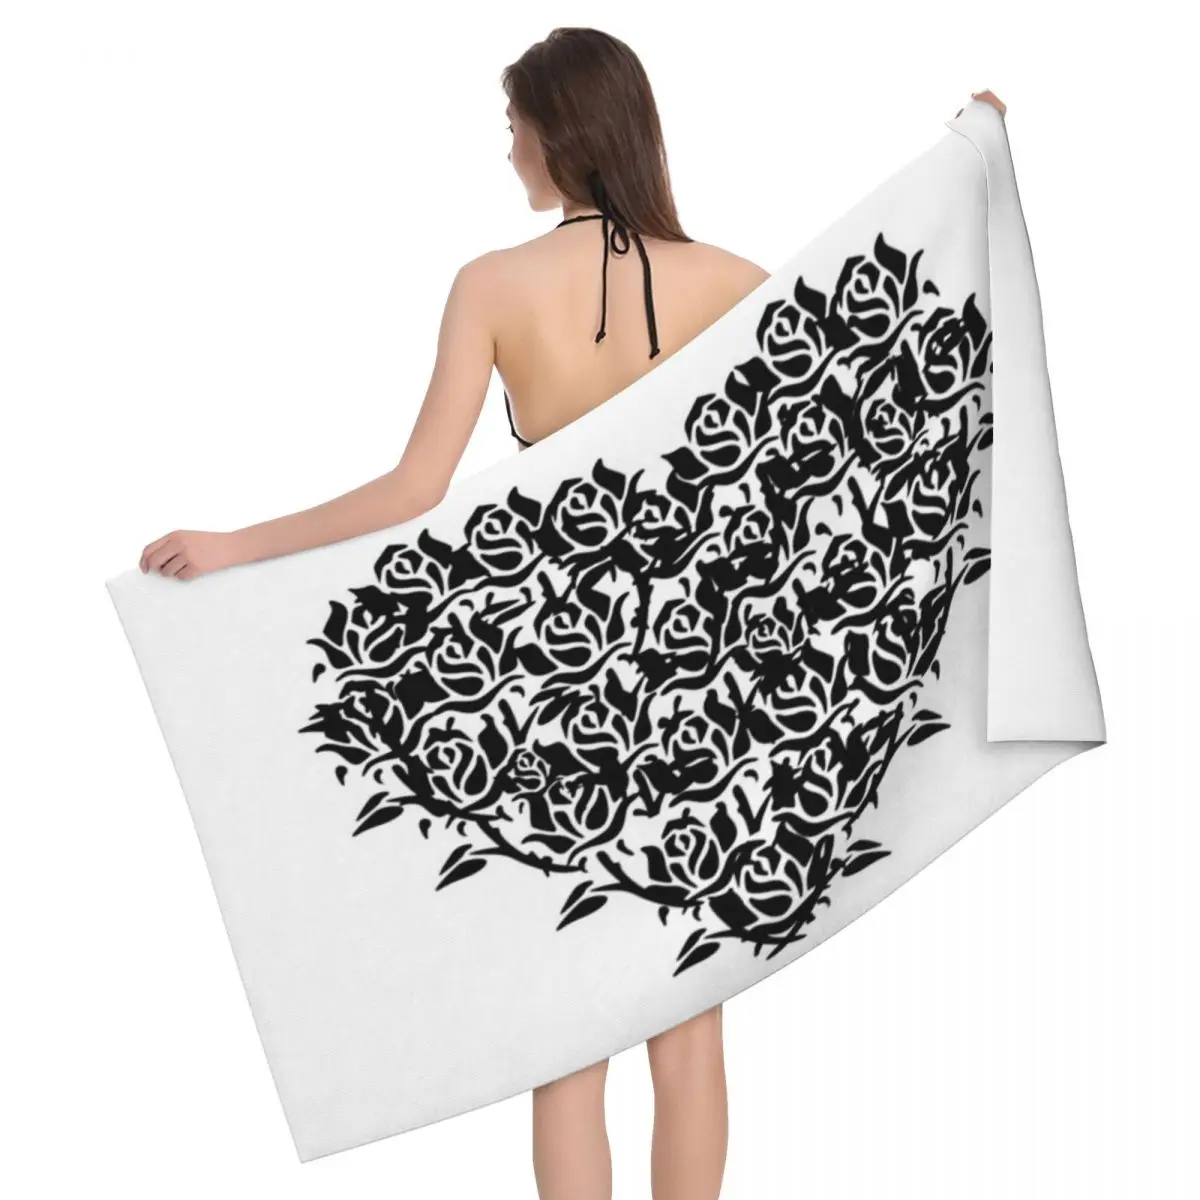 

Black Roses In The Shape Of Heart 80x130cm Bath Towel Soft For Picnic Towel For Traveller